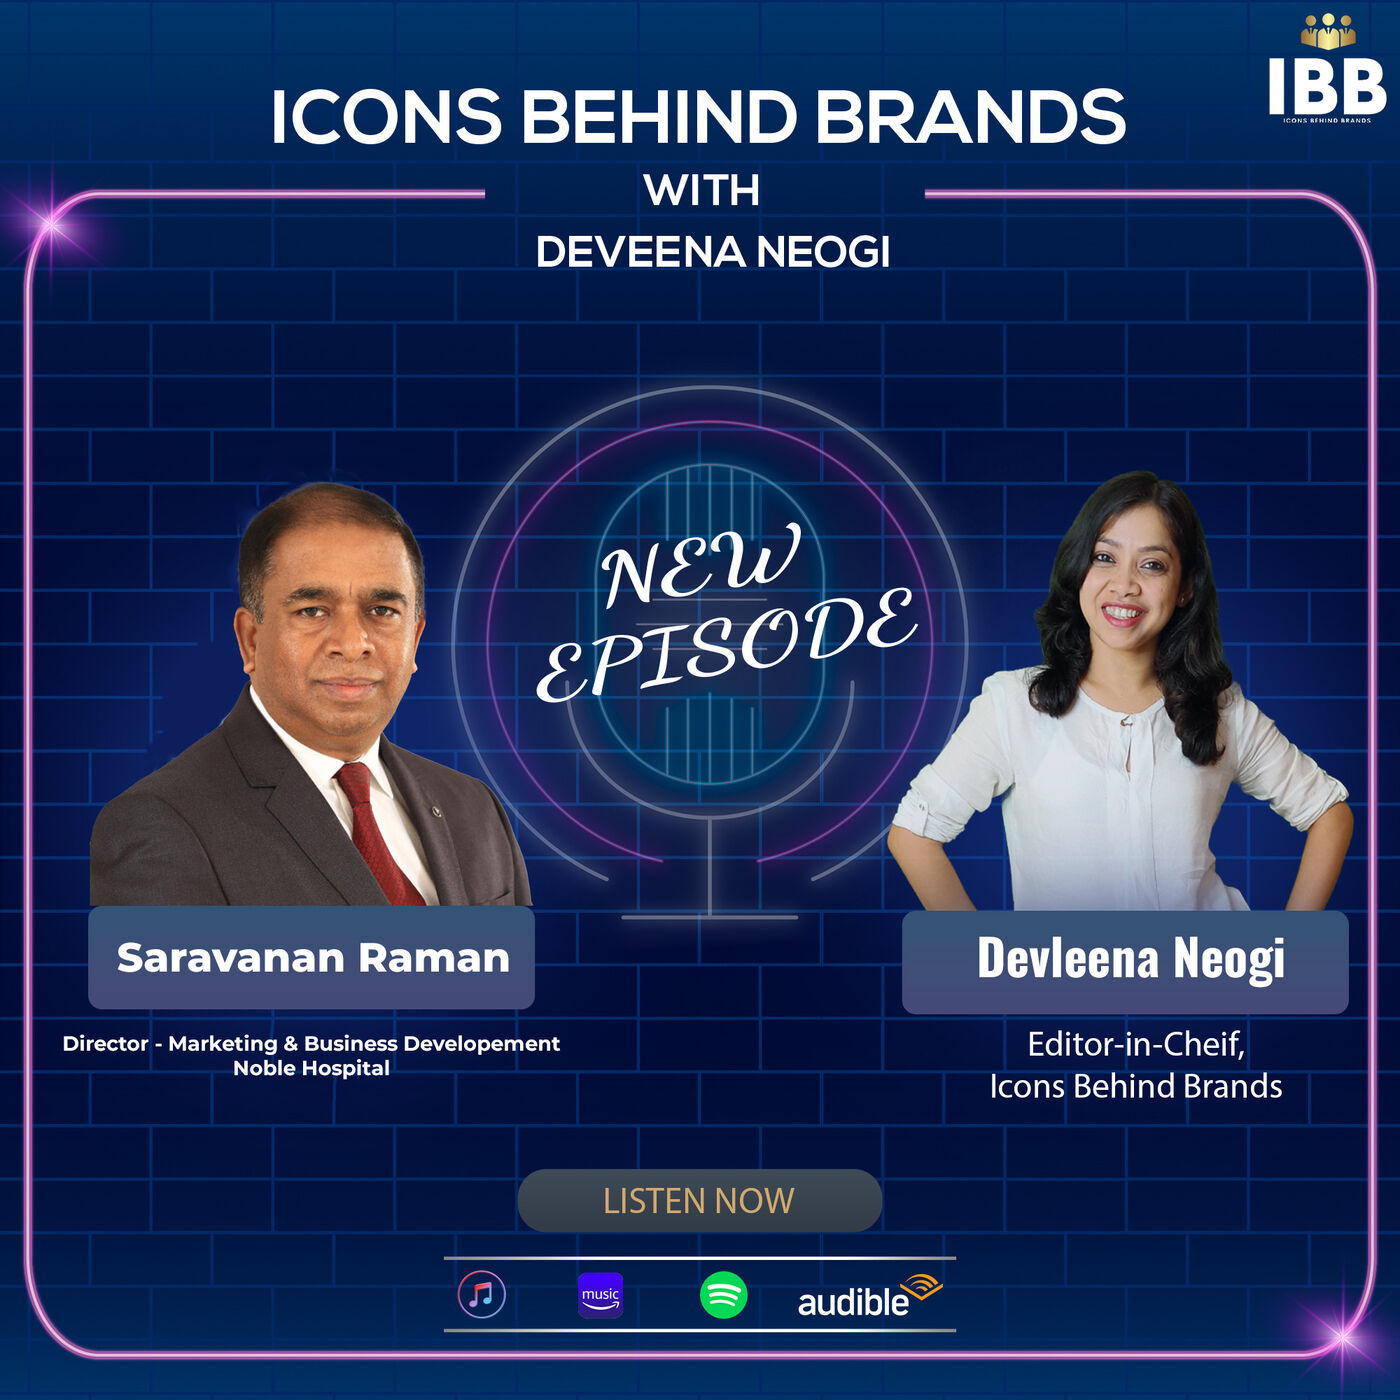 Interview about marketing, branding and connecting with customers featuring Mr Sarvanan Raman, Vice President of Marketing at MGM Healthcare